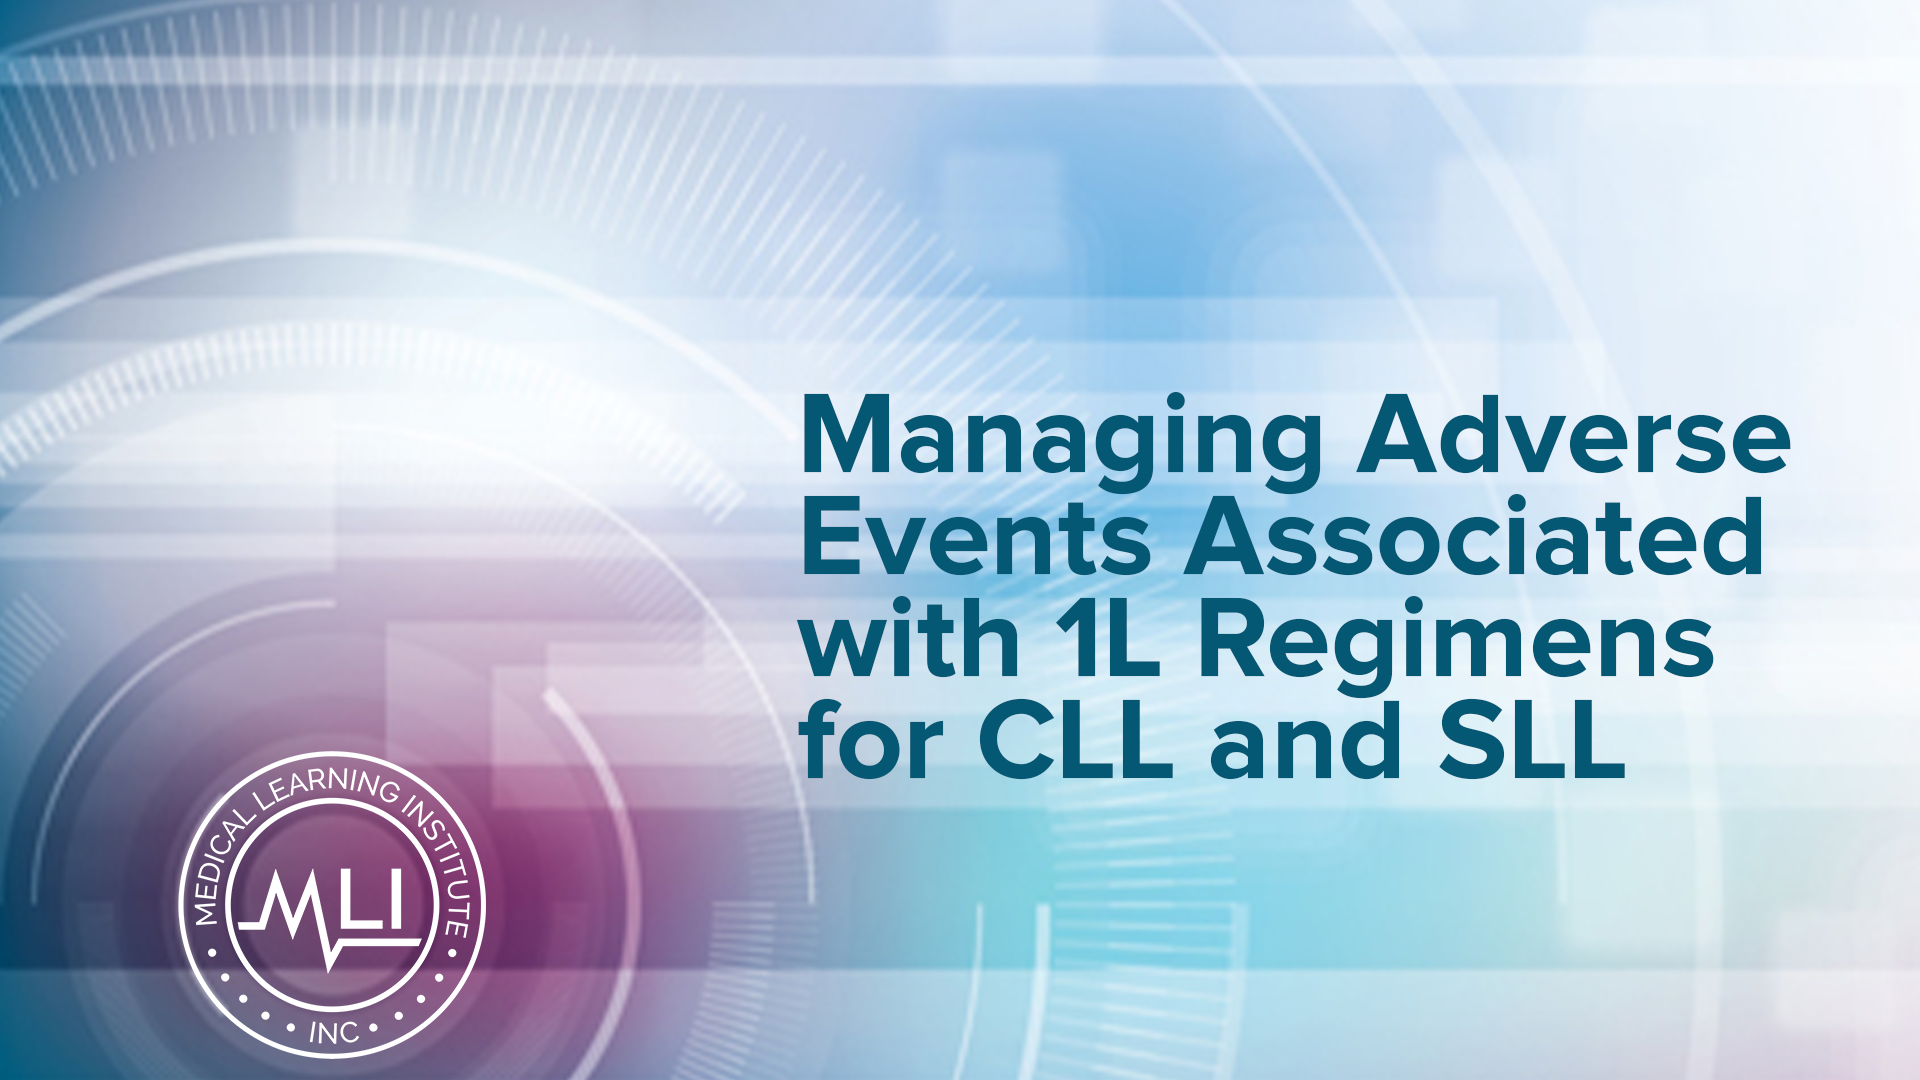 Managing Adverse events associated with 1L regimens for CLL and SLL